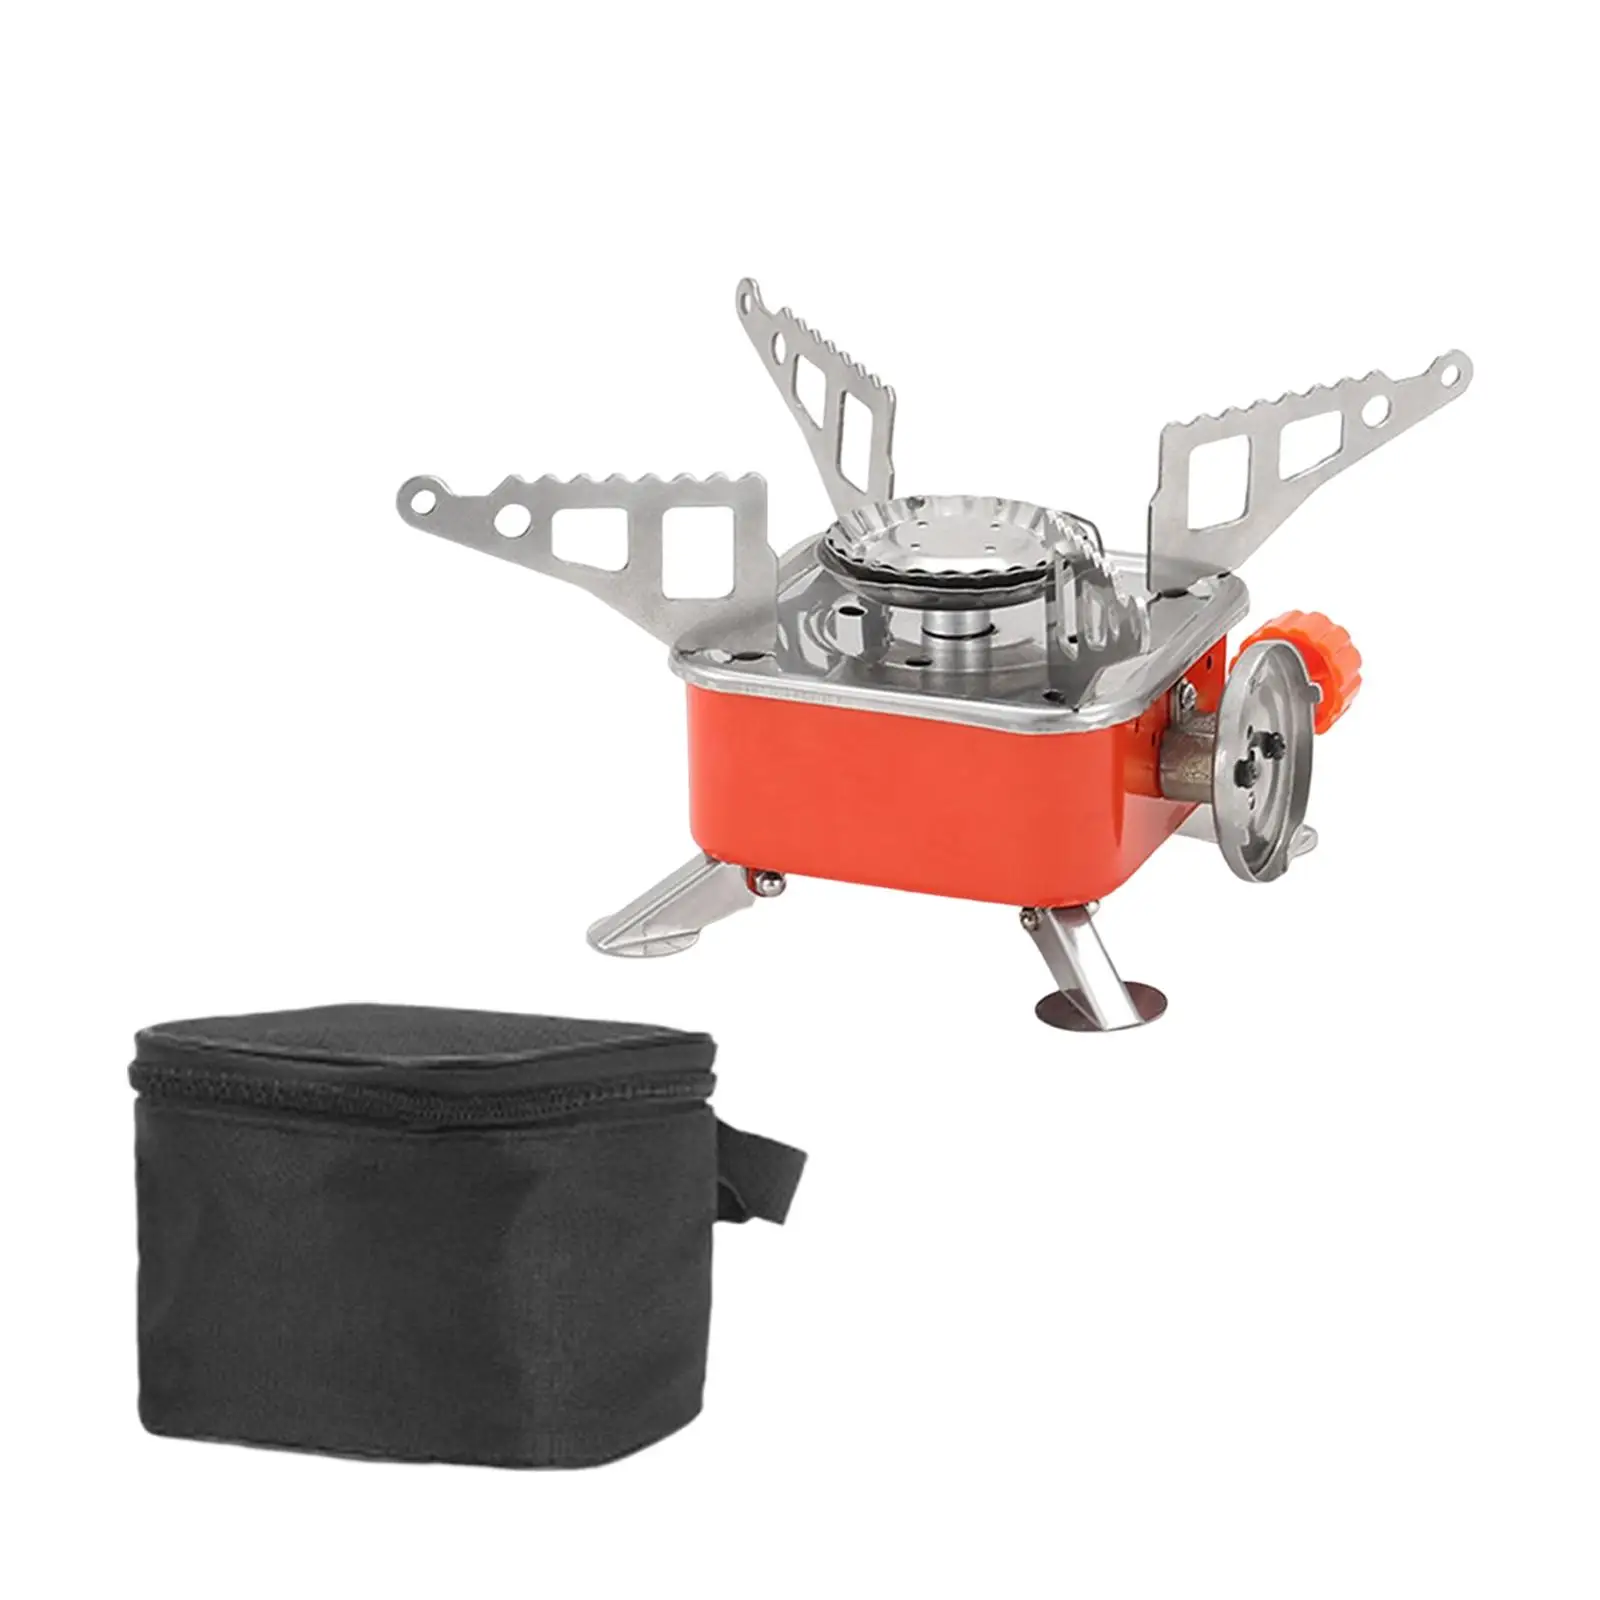 Portable Camping Gas Stove with Carrying Case Foldable Mini Cooking Cooker Gear Camp Stove for Picnic Fishing Outdoor Hiking